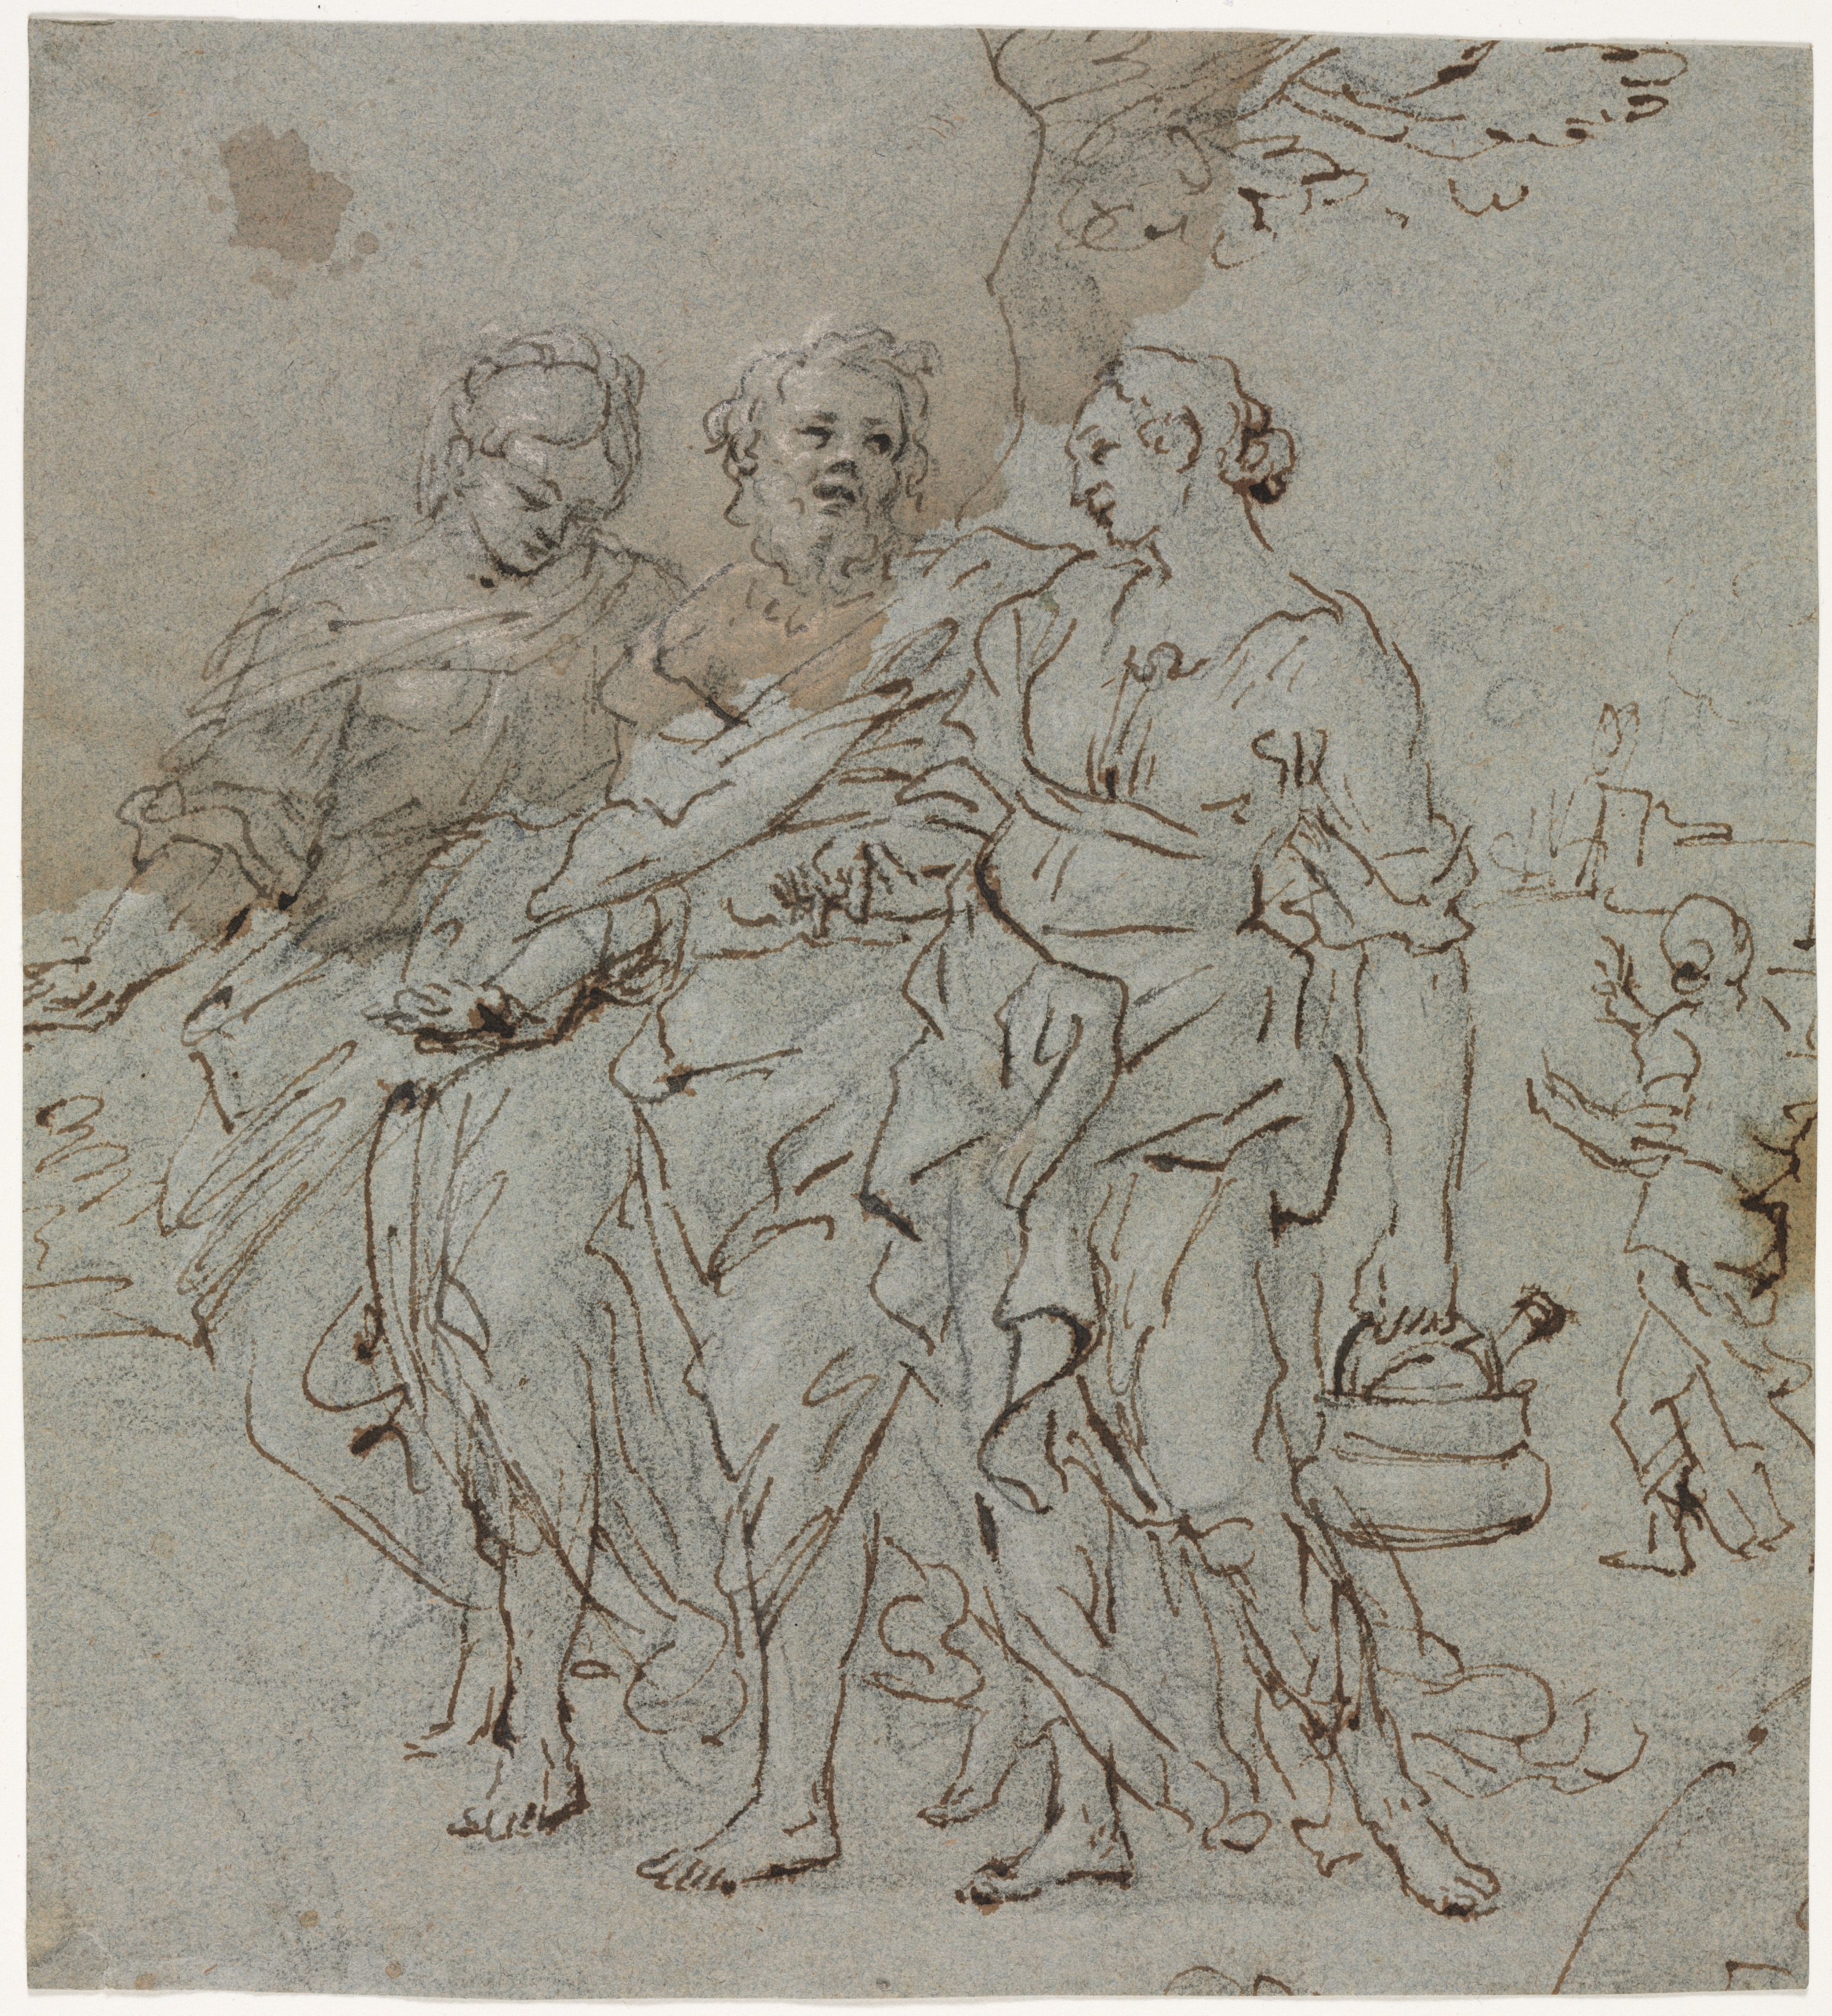 Lot and His Daughters (recto)